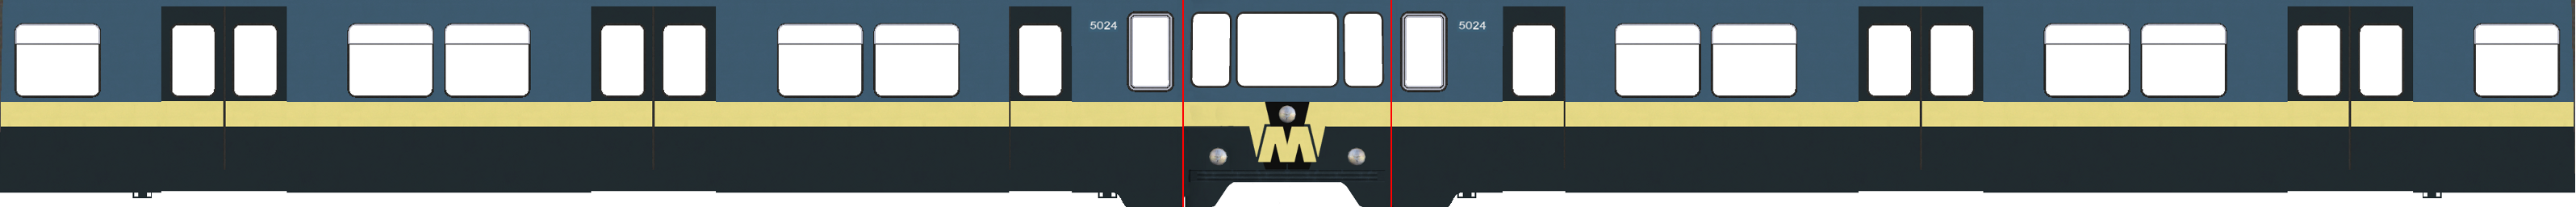 MG2Template.png